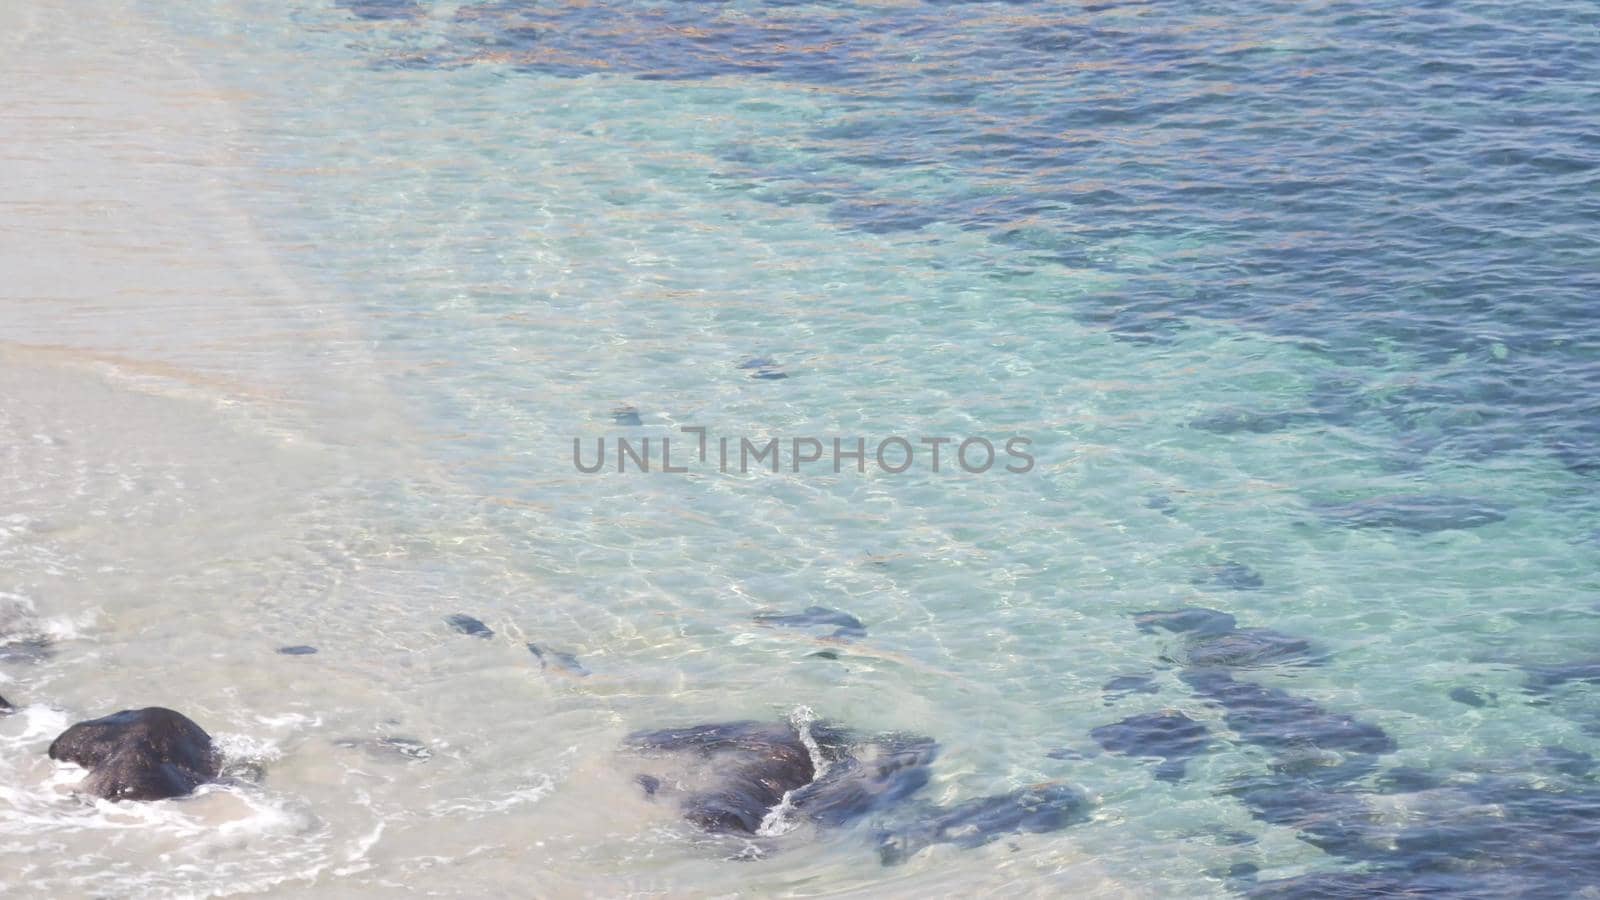 Crystal blue azure transparent ocean, La Jolla cove, California coast, USA. Turquoise translucent clear sea waves from above. Rippled water surface, tropical beach paradise lagoon, summer vacations.